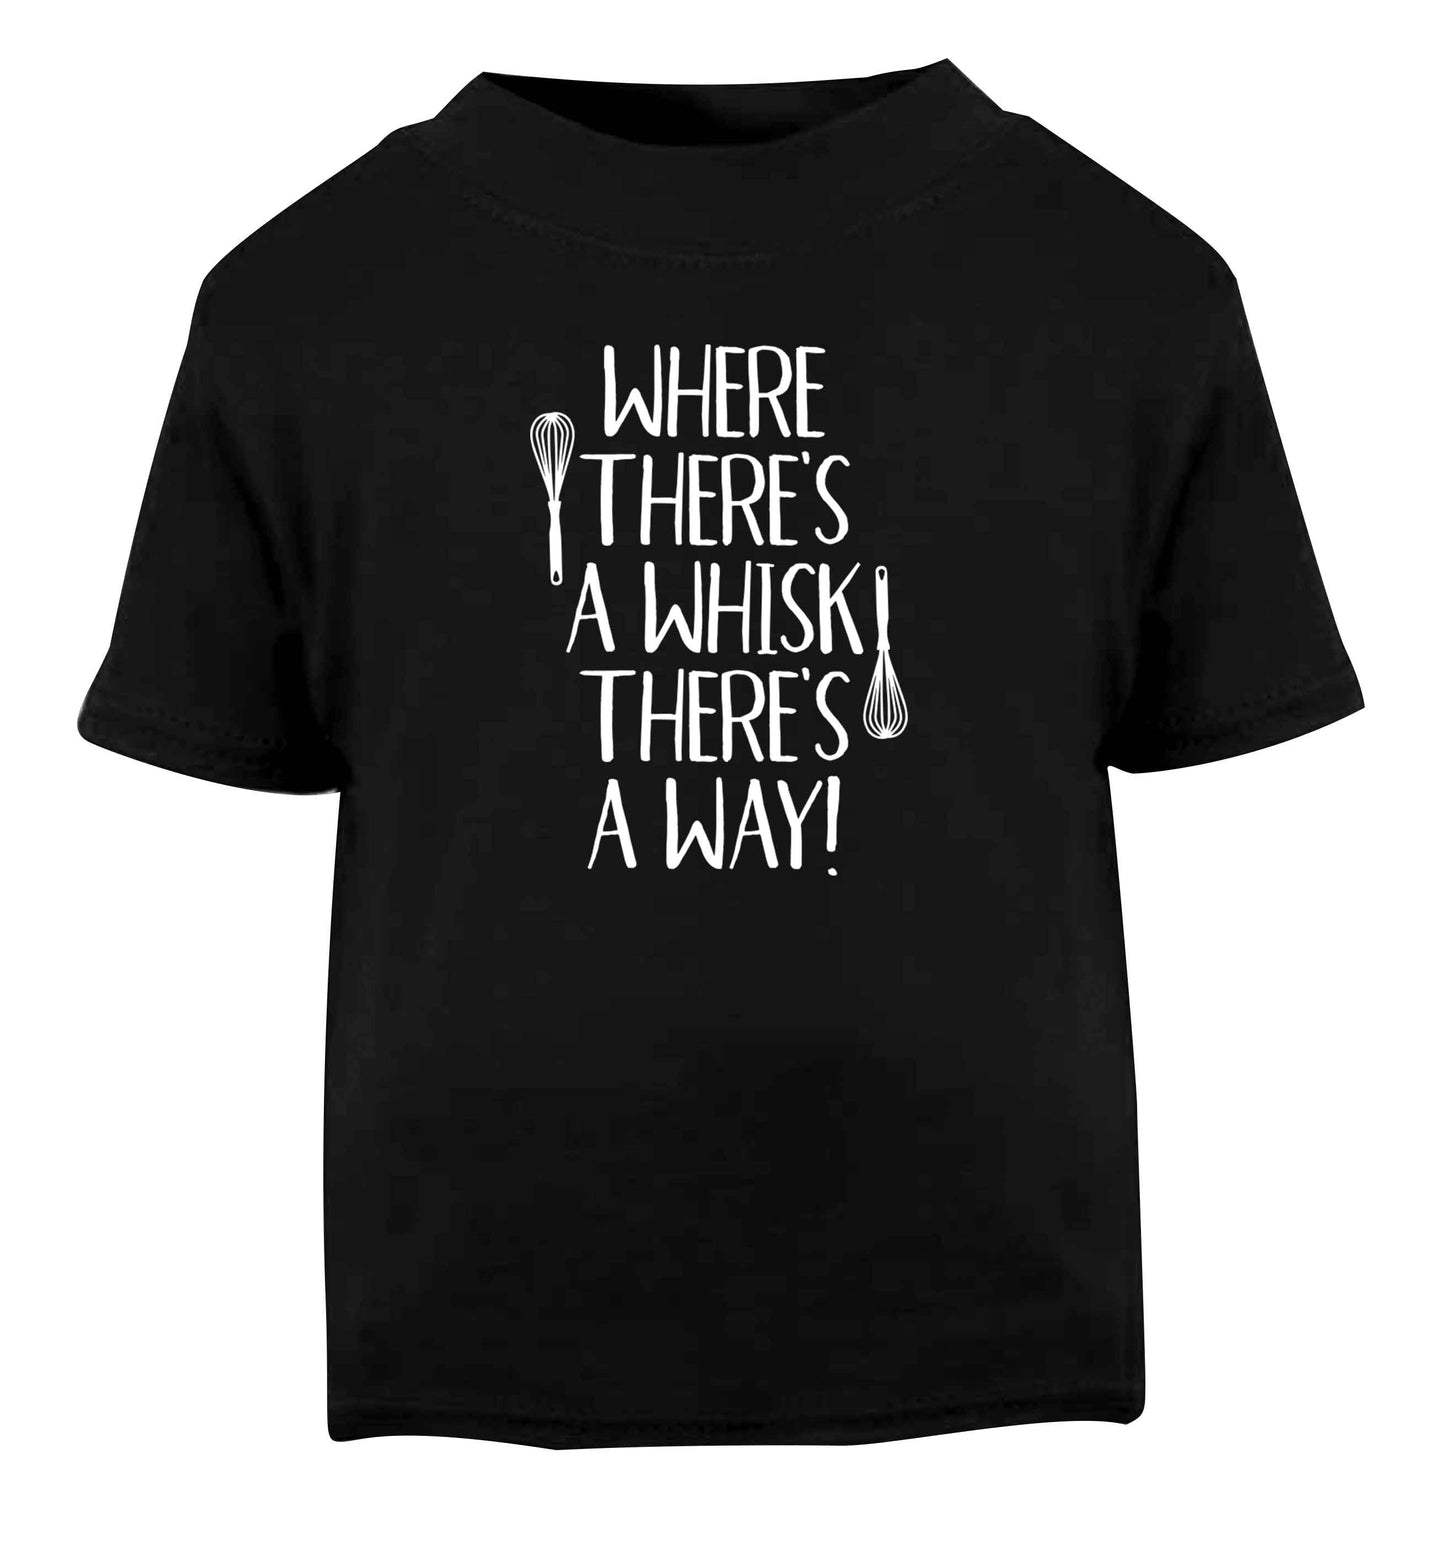 Where there's a whisk there's a way Black Baby Toddler Tshirt 2 years